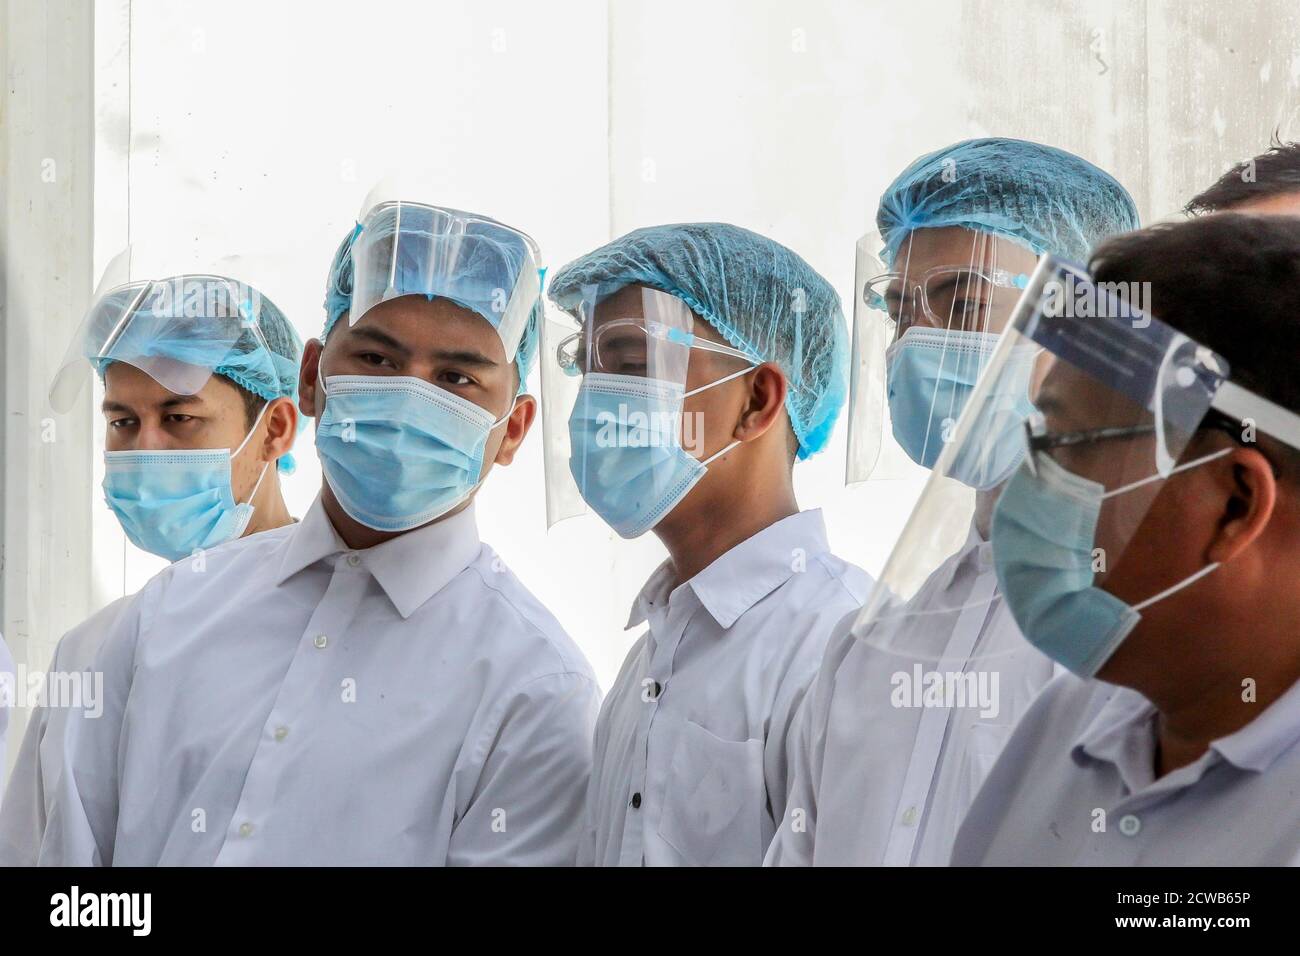 Manila. 29th Sep, 2020. People wearing protective equipment are seen inside the newly-launched COVID-19 isolation facility in Manila, the Philippines on Sept. 29, 2020. The number of confirmed COVID-19 cases in the Philippines surged to 309,303 after the Department of Health (DOH) reported 2,025 new daily cases on Tuesday. Philippine President Rodrigo Duterte approved on Monday night the recommendation of an inter-agency coronavirus task force to extend the quarantine measures in Metro Manila until Oct. 31. Credit: Rouelle Umali/Xinhua/Alamy Live News Stock Photo